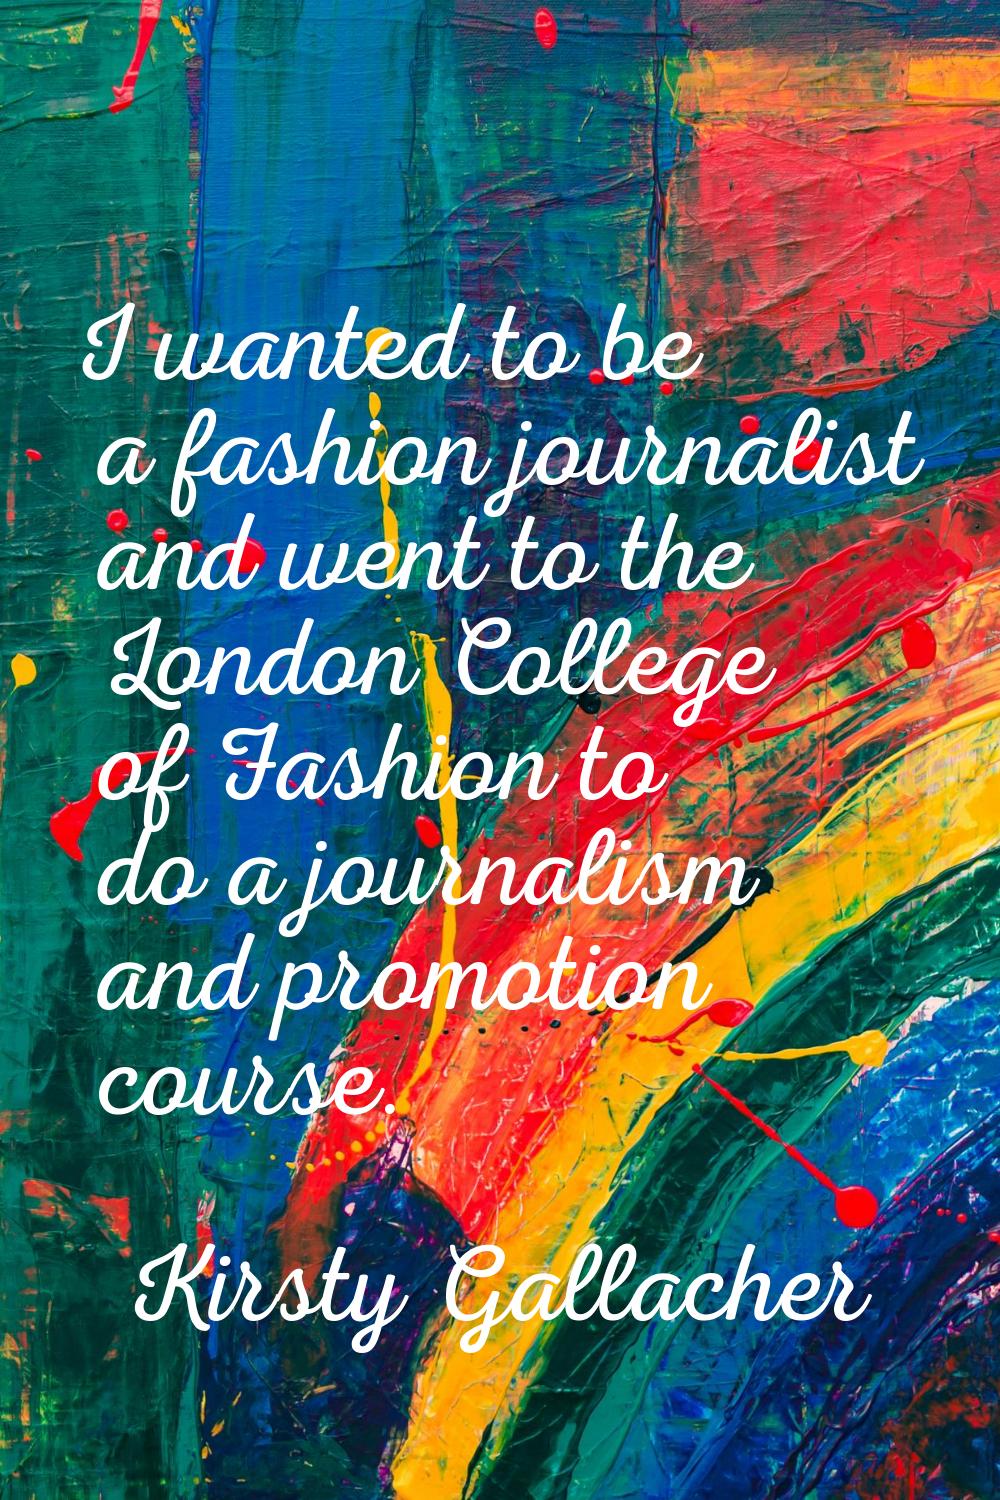 I wanted to be a fashion journalist and went to the London College of Fashion to do a journalism an